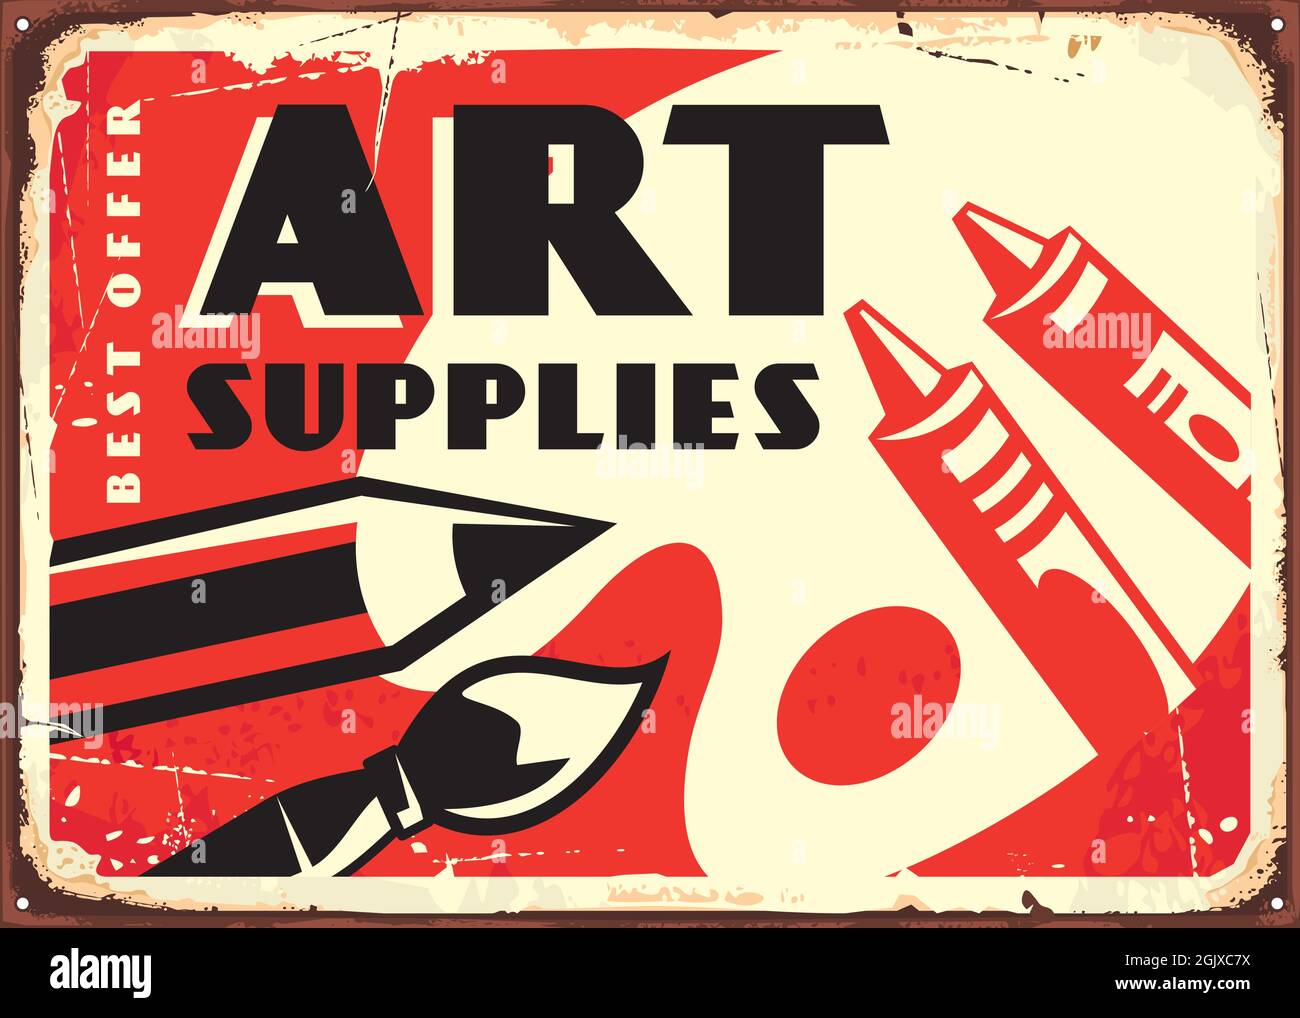 Art supplies retro ad design. Old sign with drawing equipment, pencils, crayons, pain brush and paint palette. Vector illustration Stock Vector